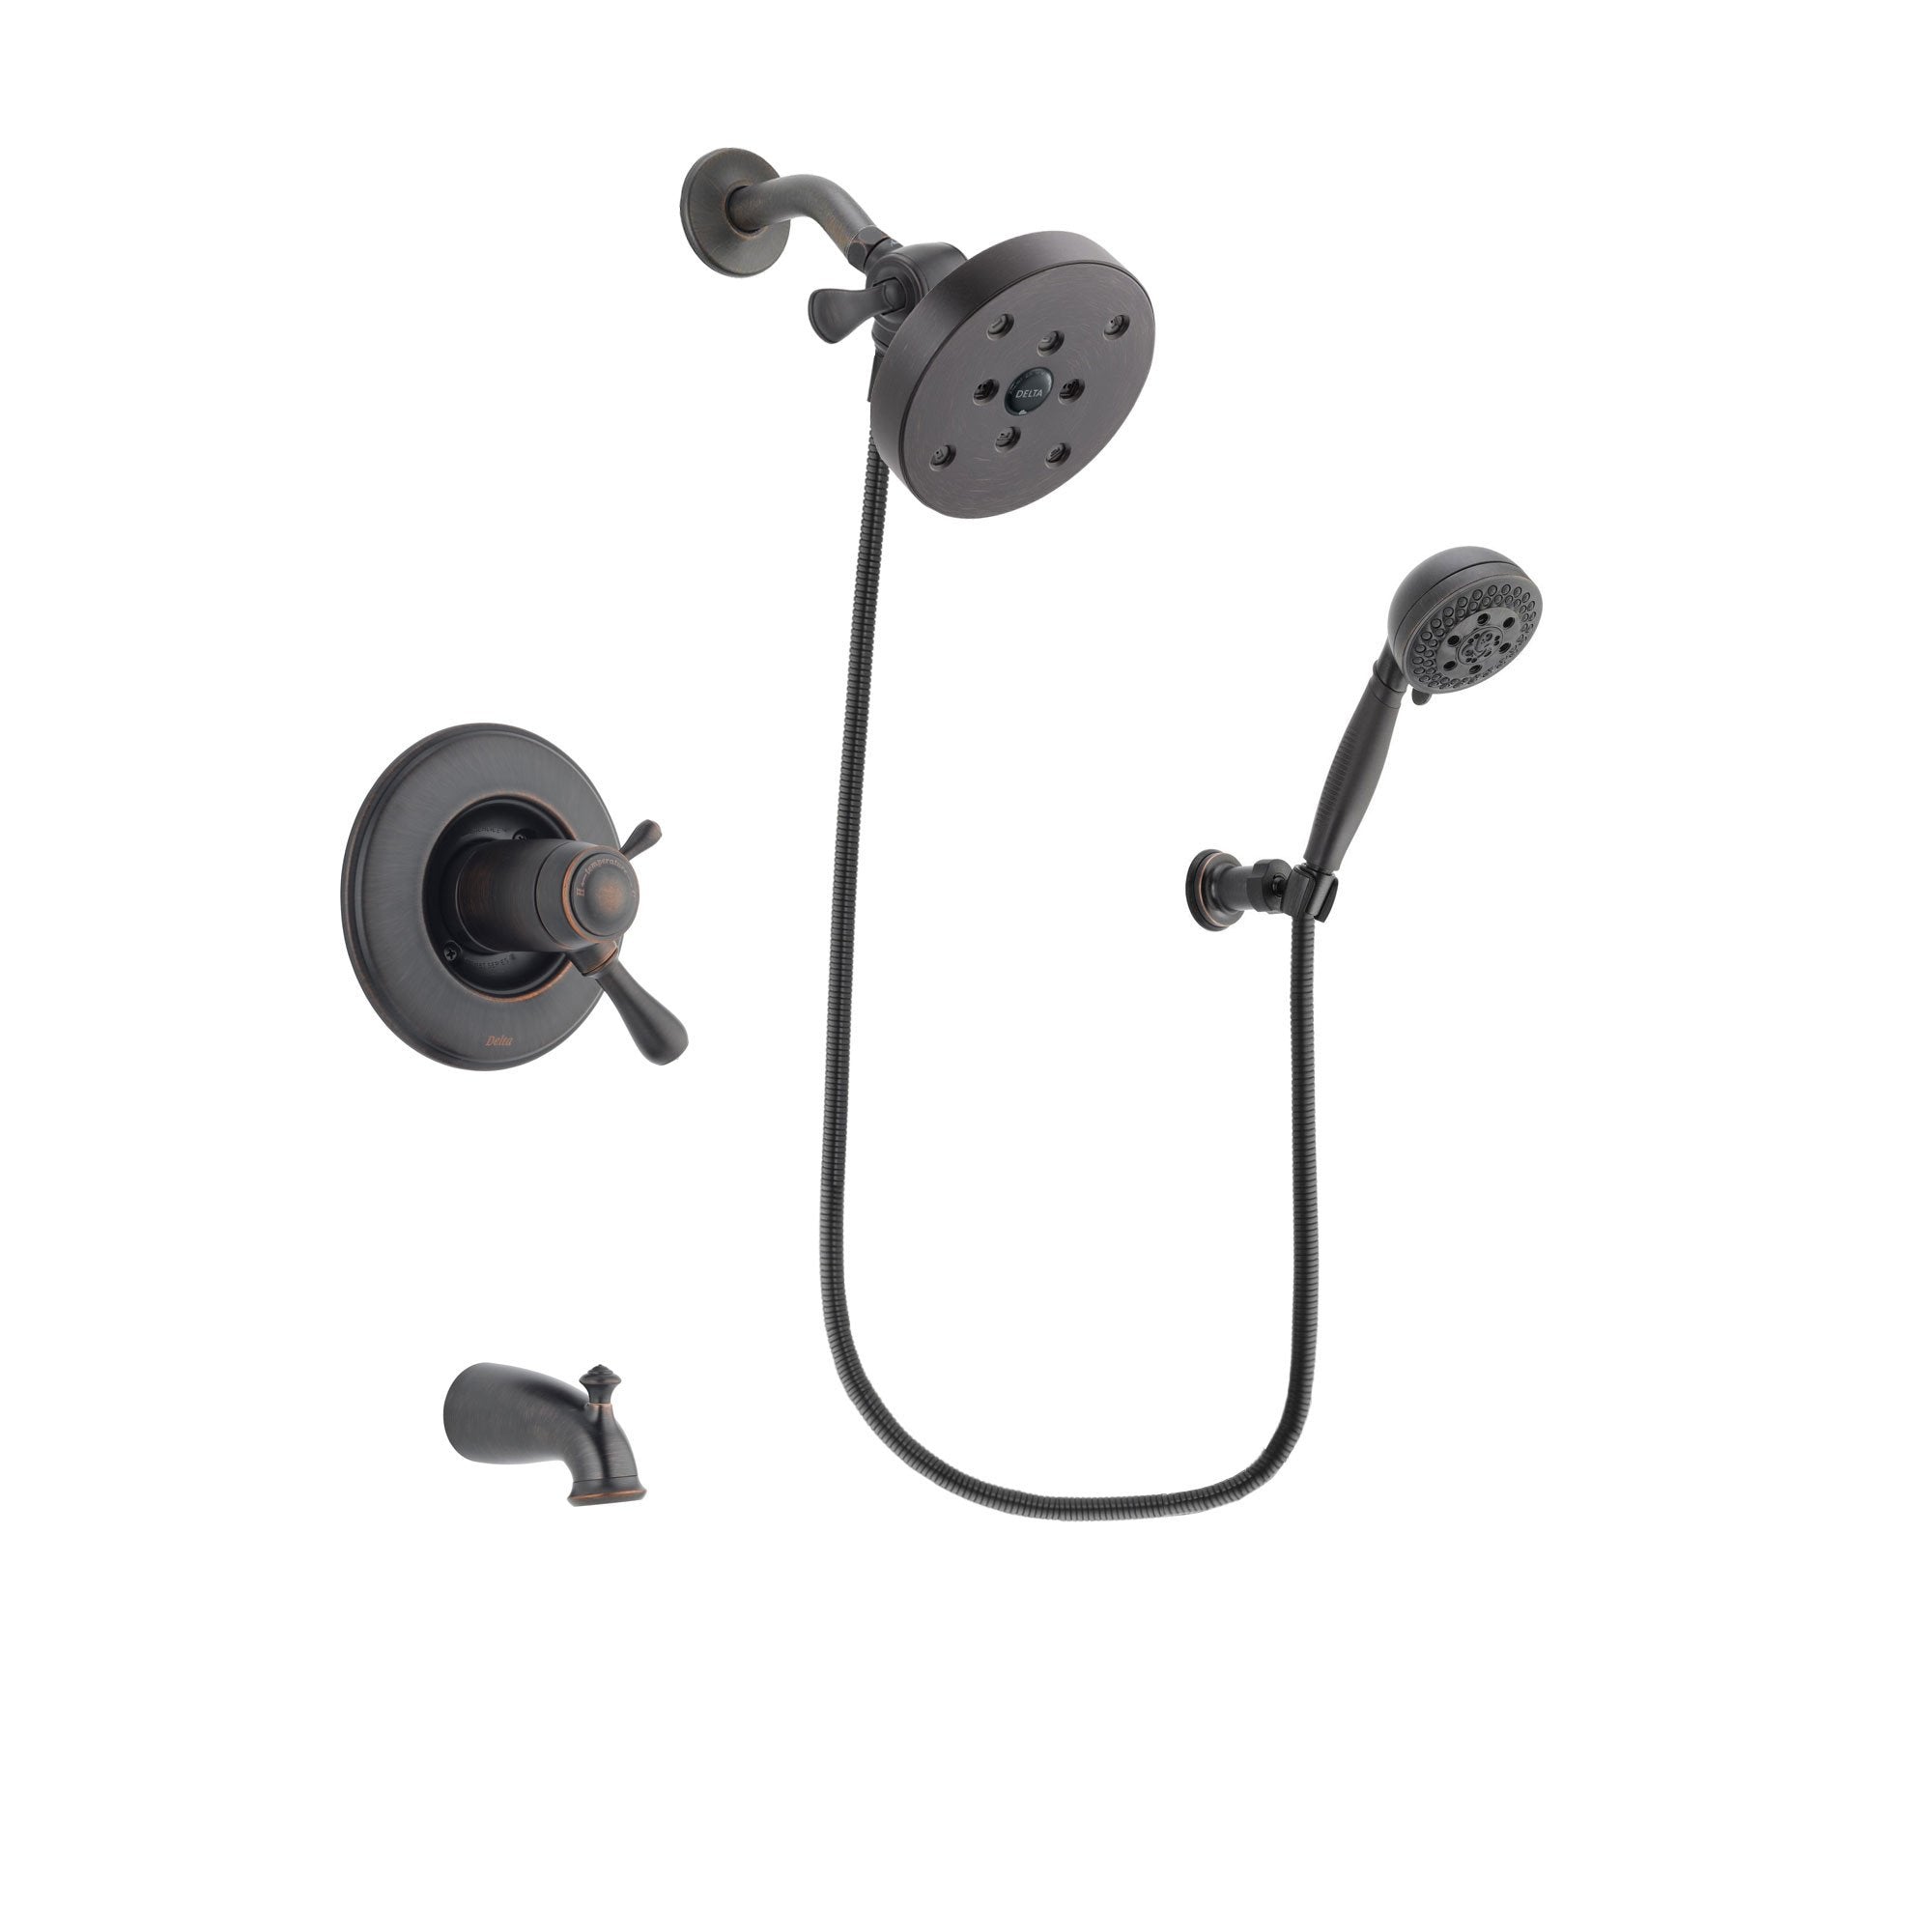 Delta Leland Venetian Bronze Finish Thermostatic Tub and Shower Faucet System Package with 5-1/2 inch Showerhead and 5-Setting Wall Mount Personal Handheld Shower Spray Includes Rough-in Valve and Tub Spout DSP2835V